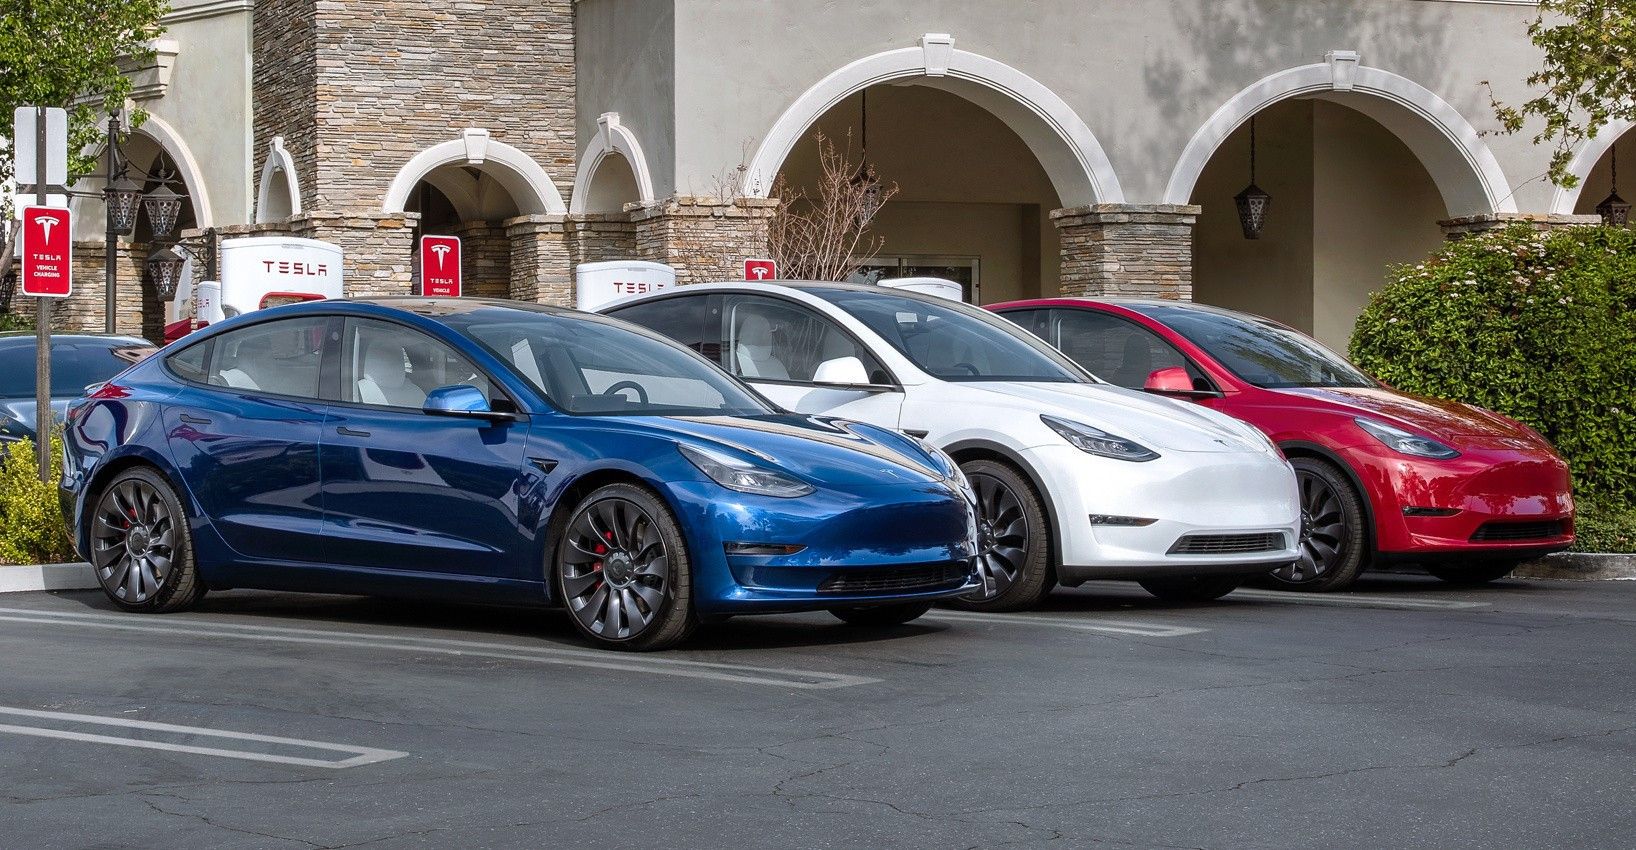 Tesla Model 3 cars parked outdoors and charging